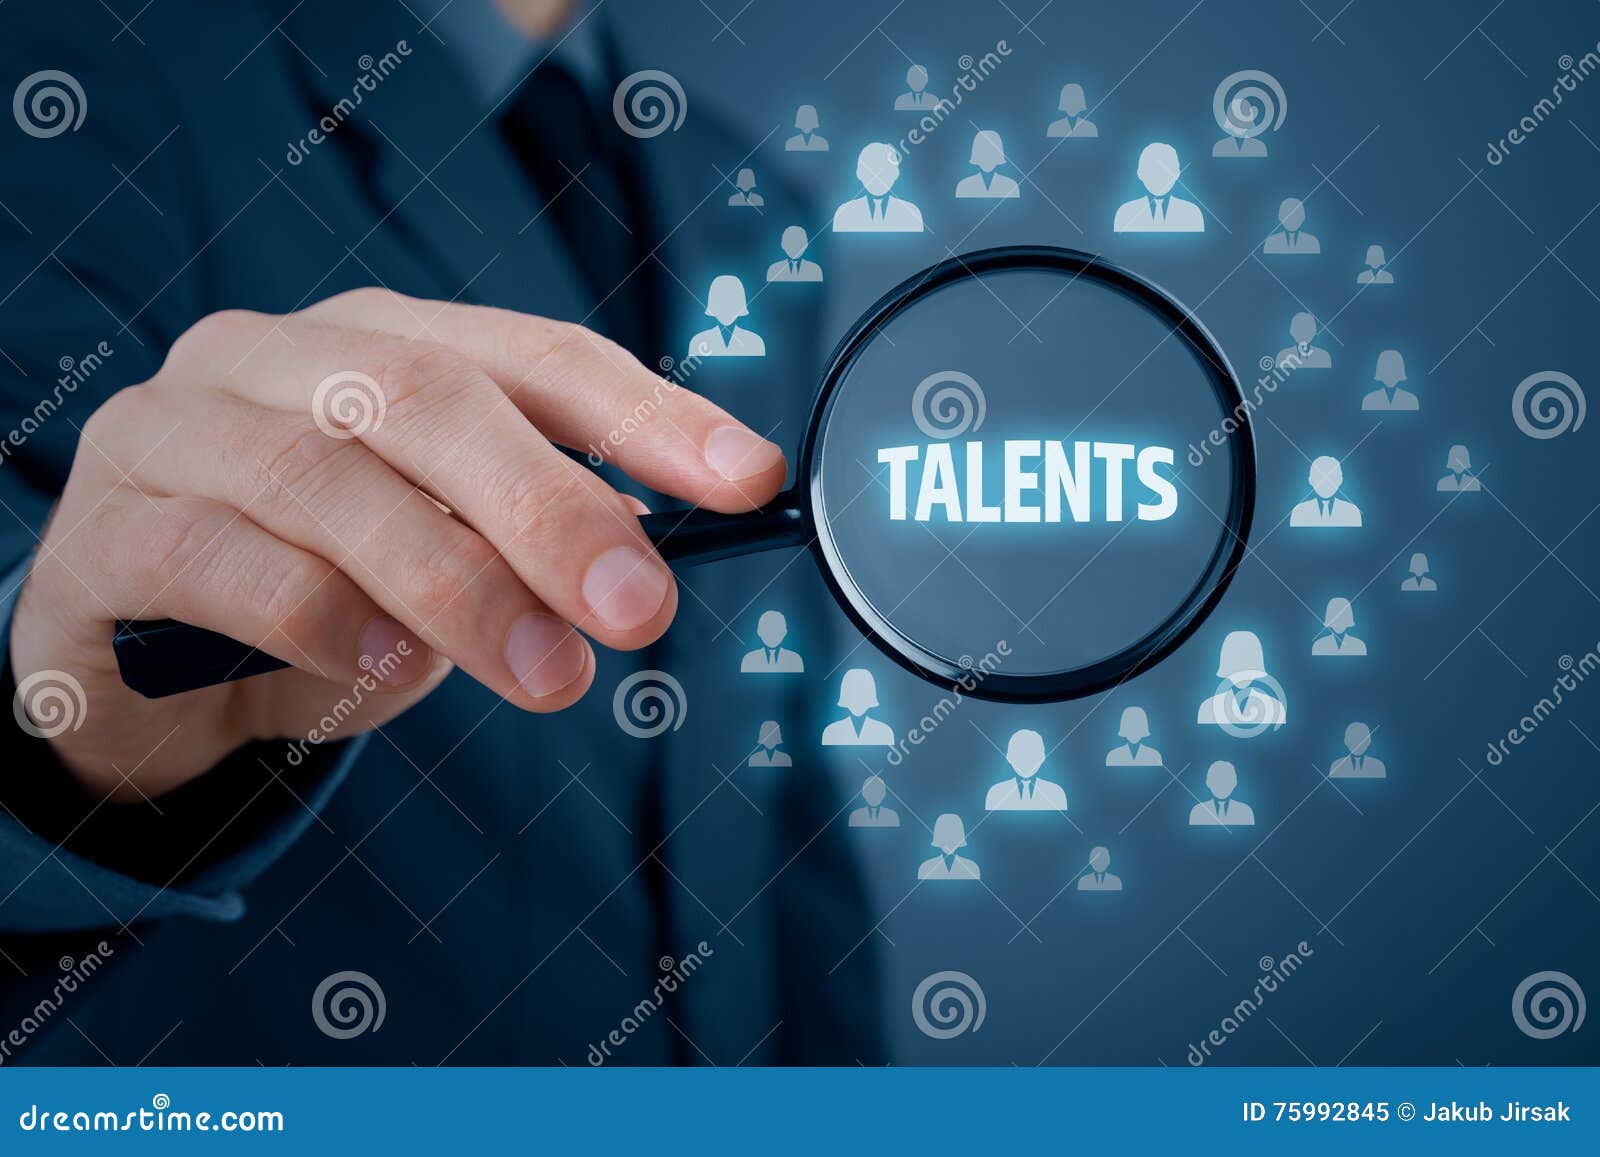 talented managers and business persons